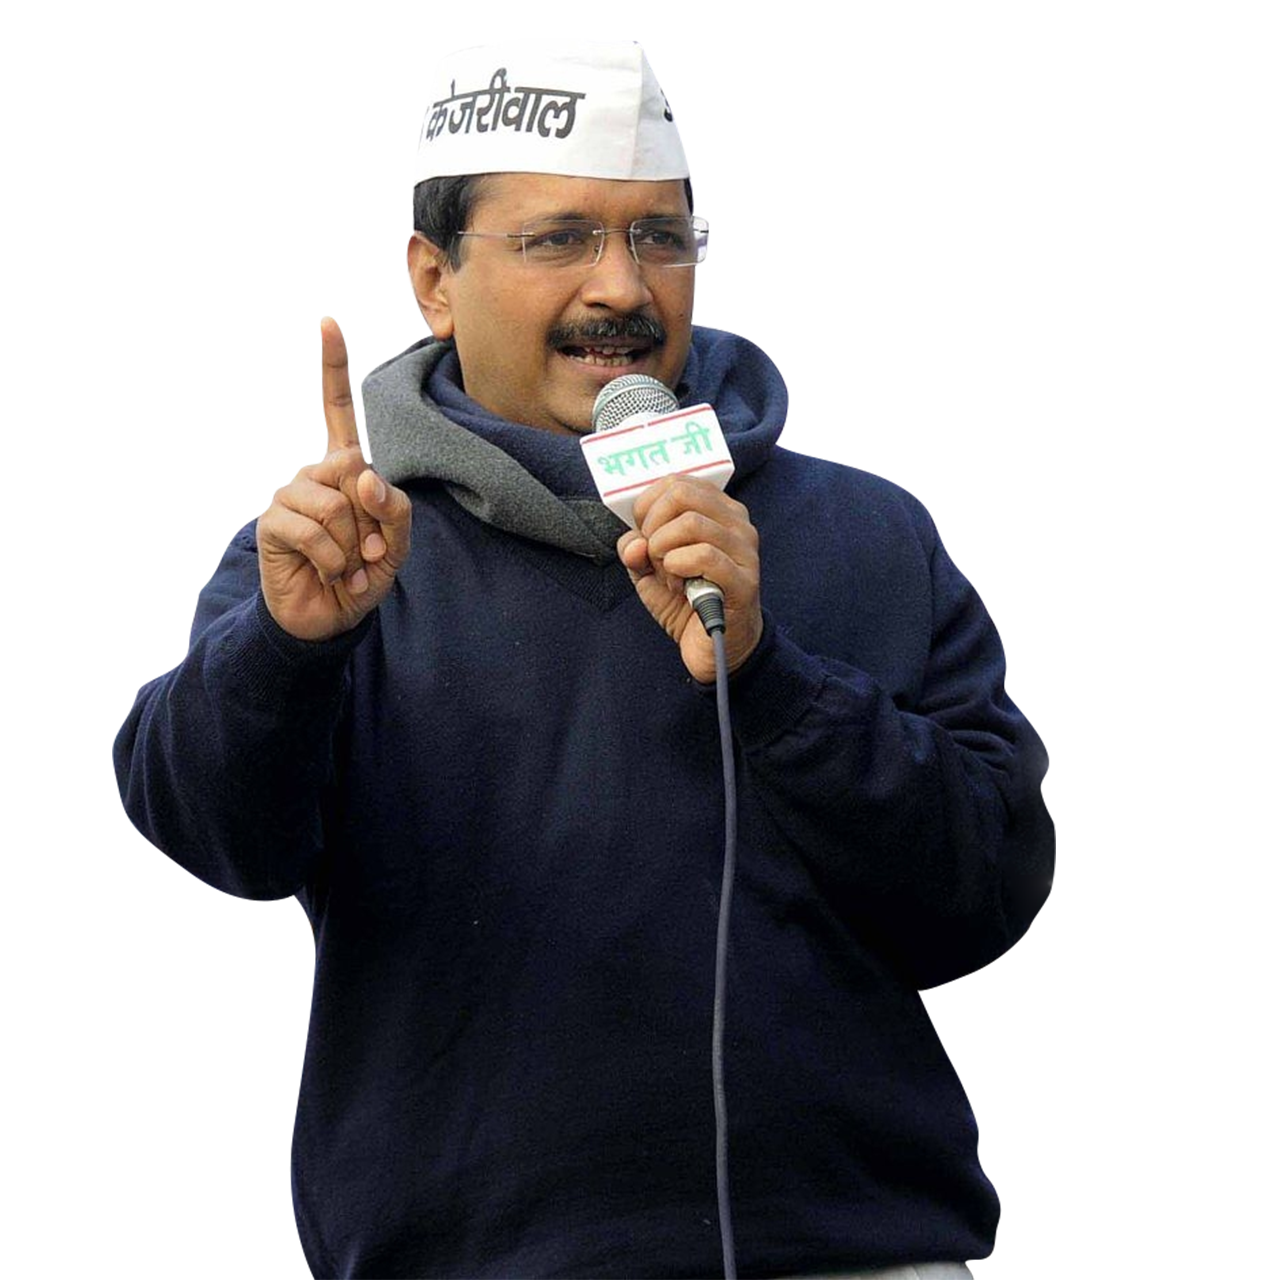 Speech with aam aadmi party cap by Kejriwal